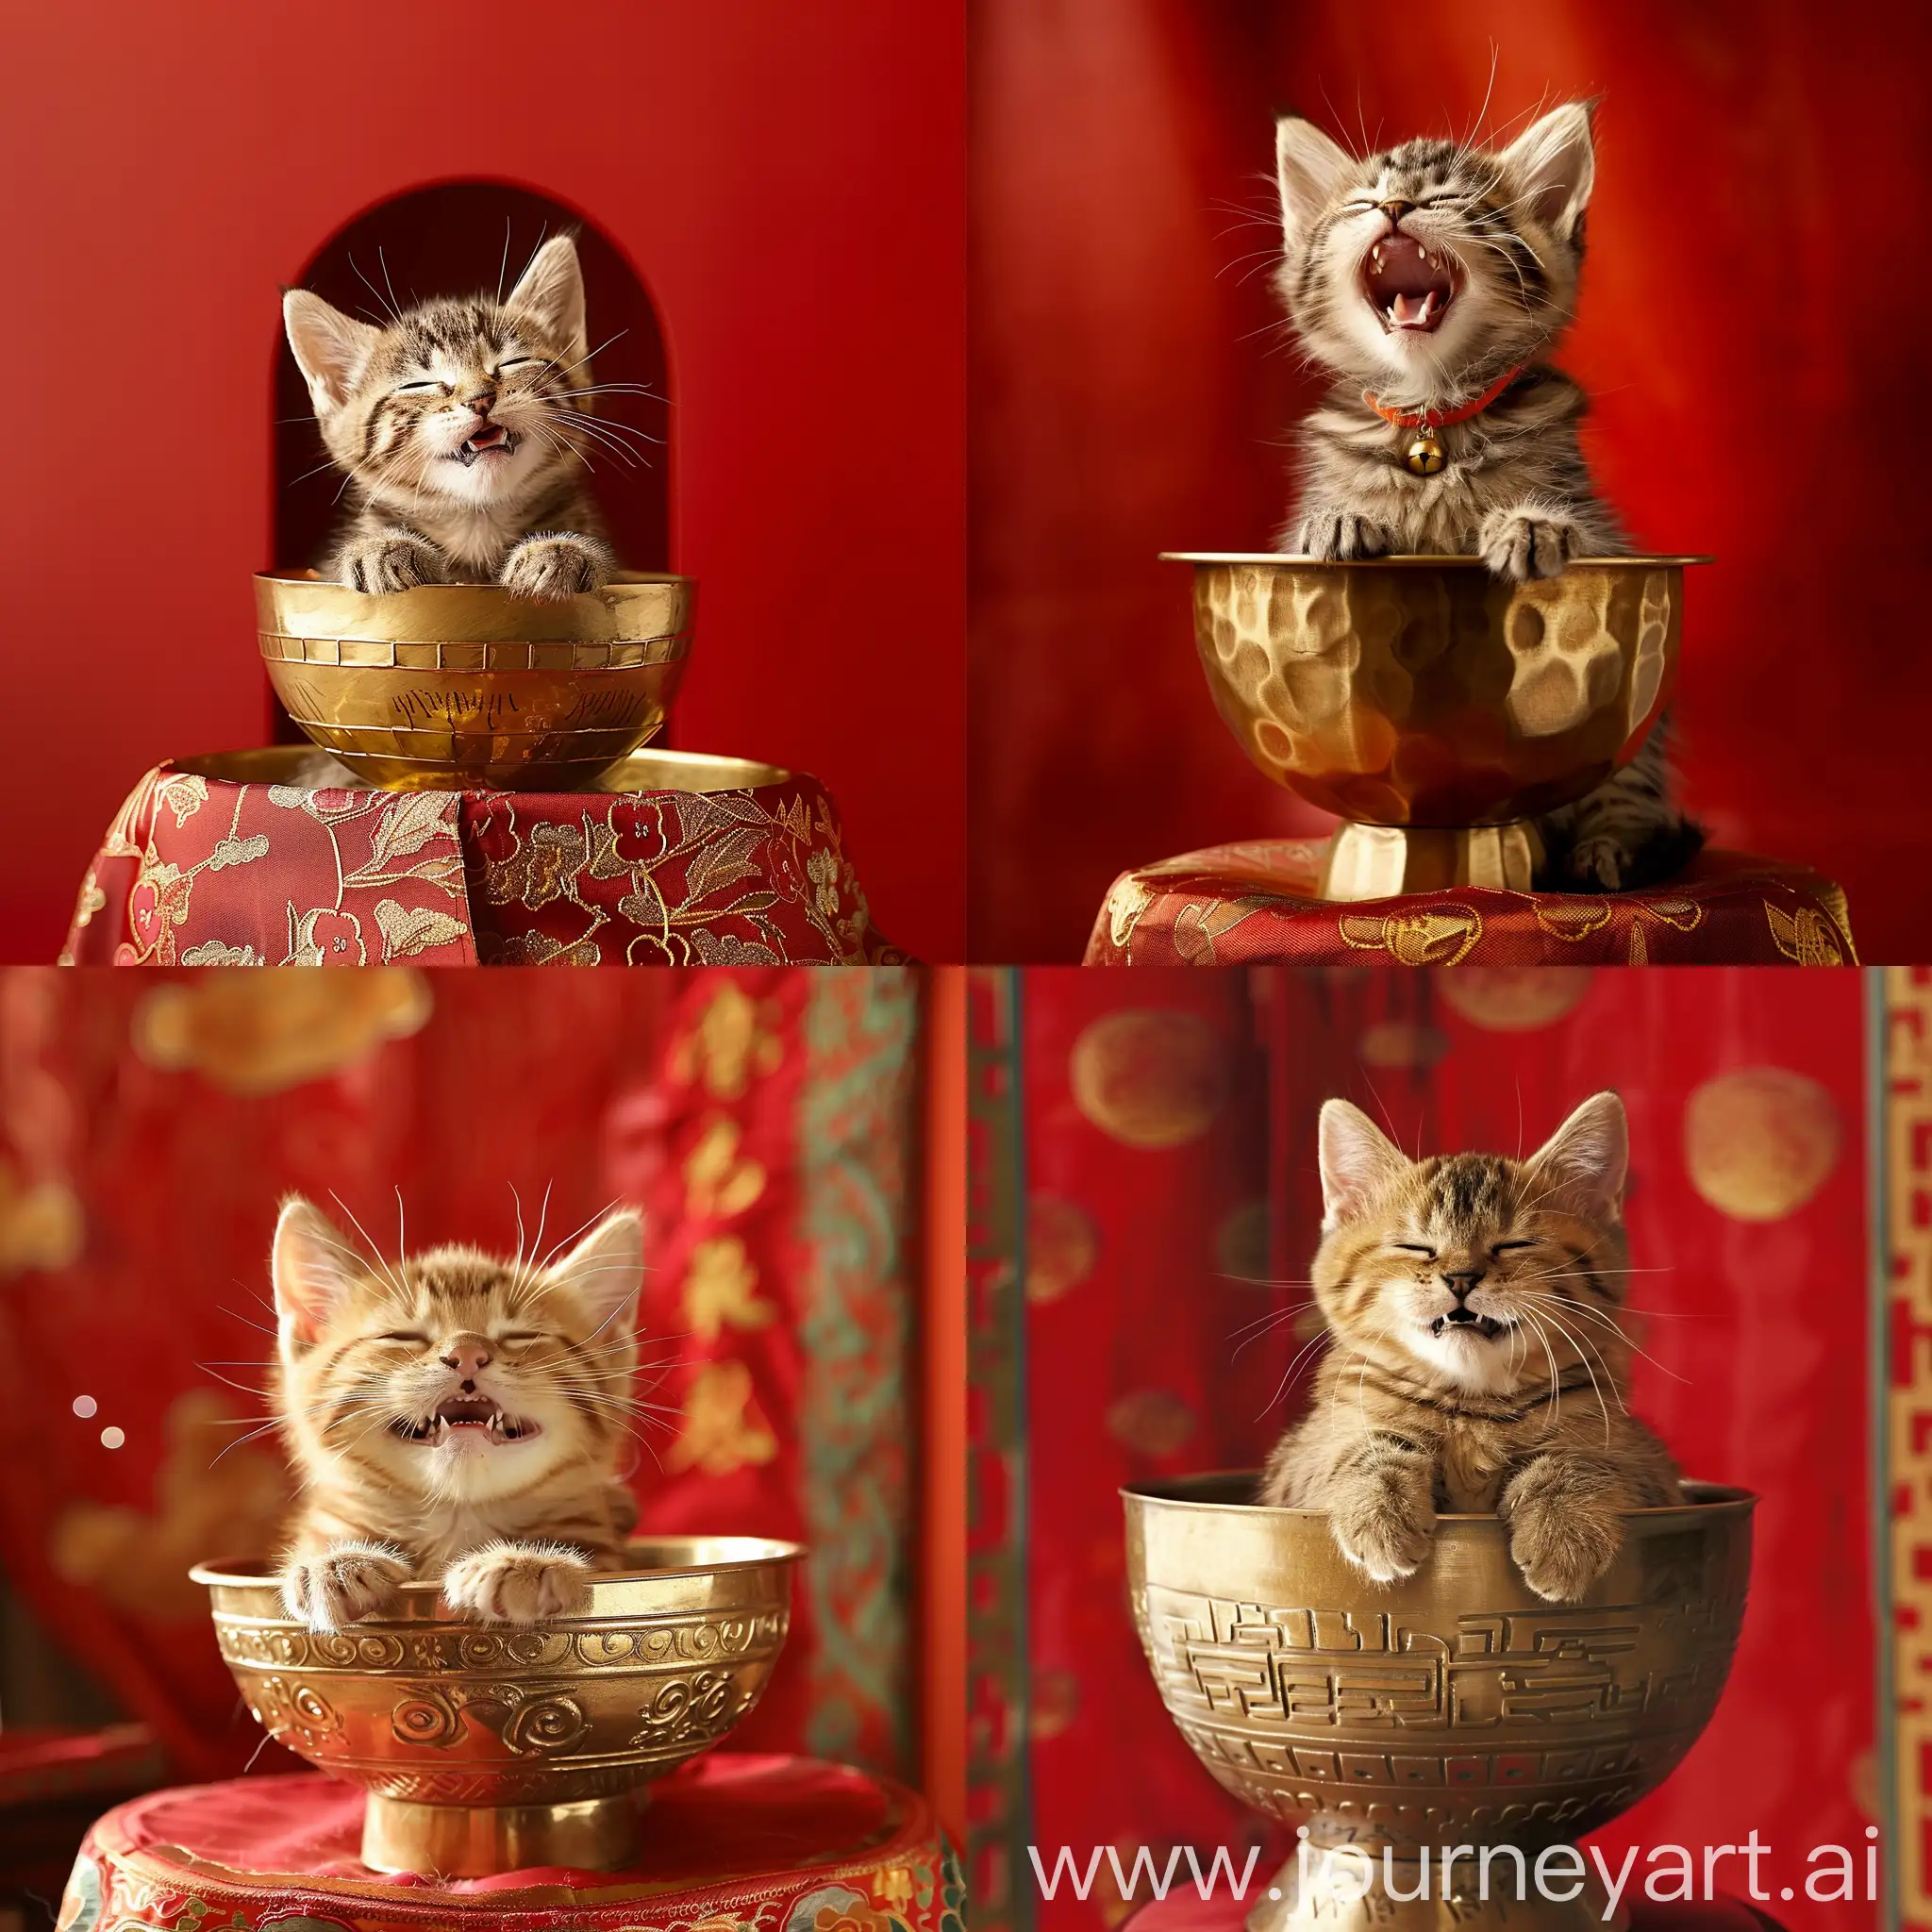 Laughing-Chinese-Lucky-Cat-in-Gold-Bowl-on-Red-Background